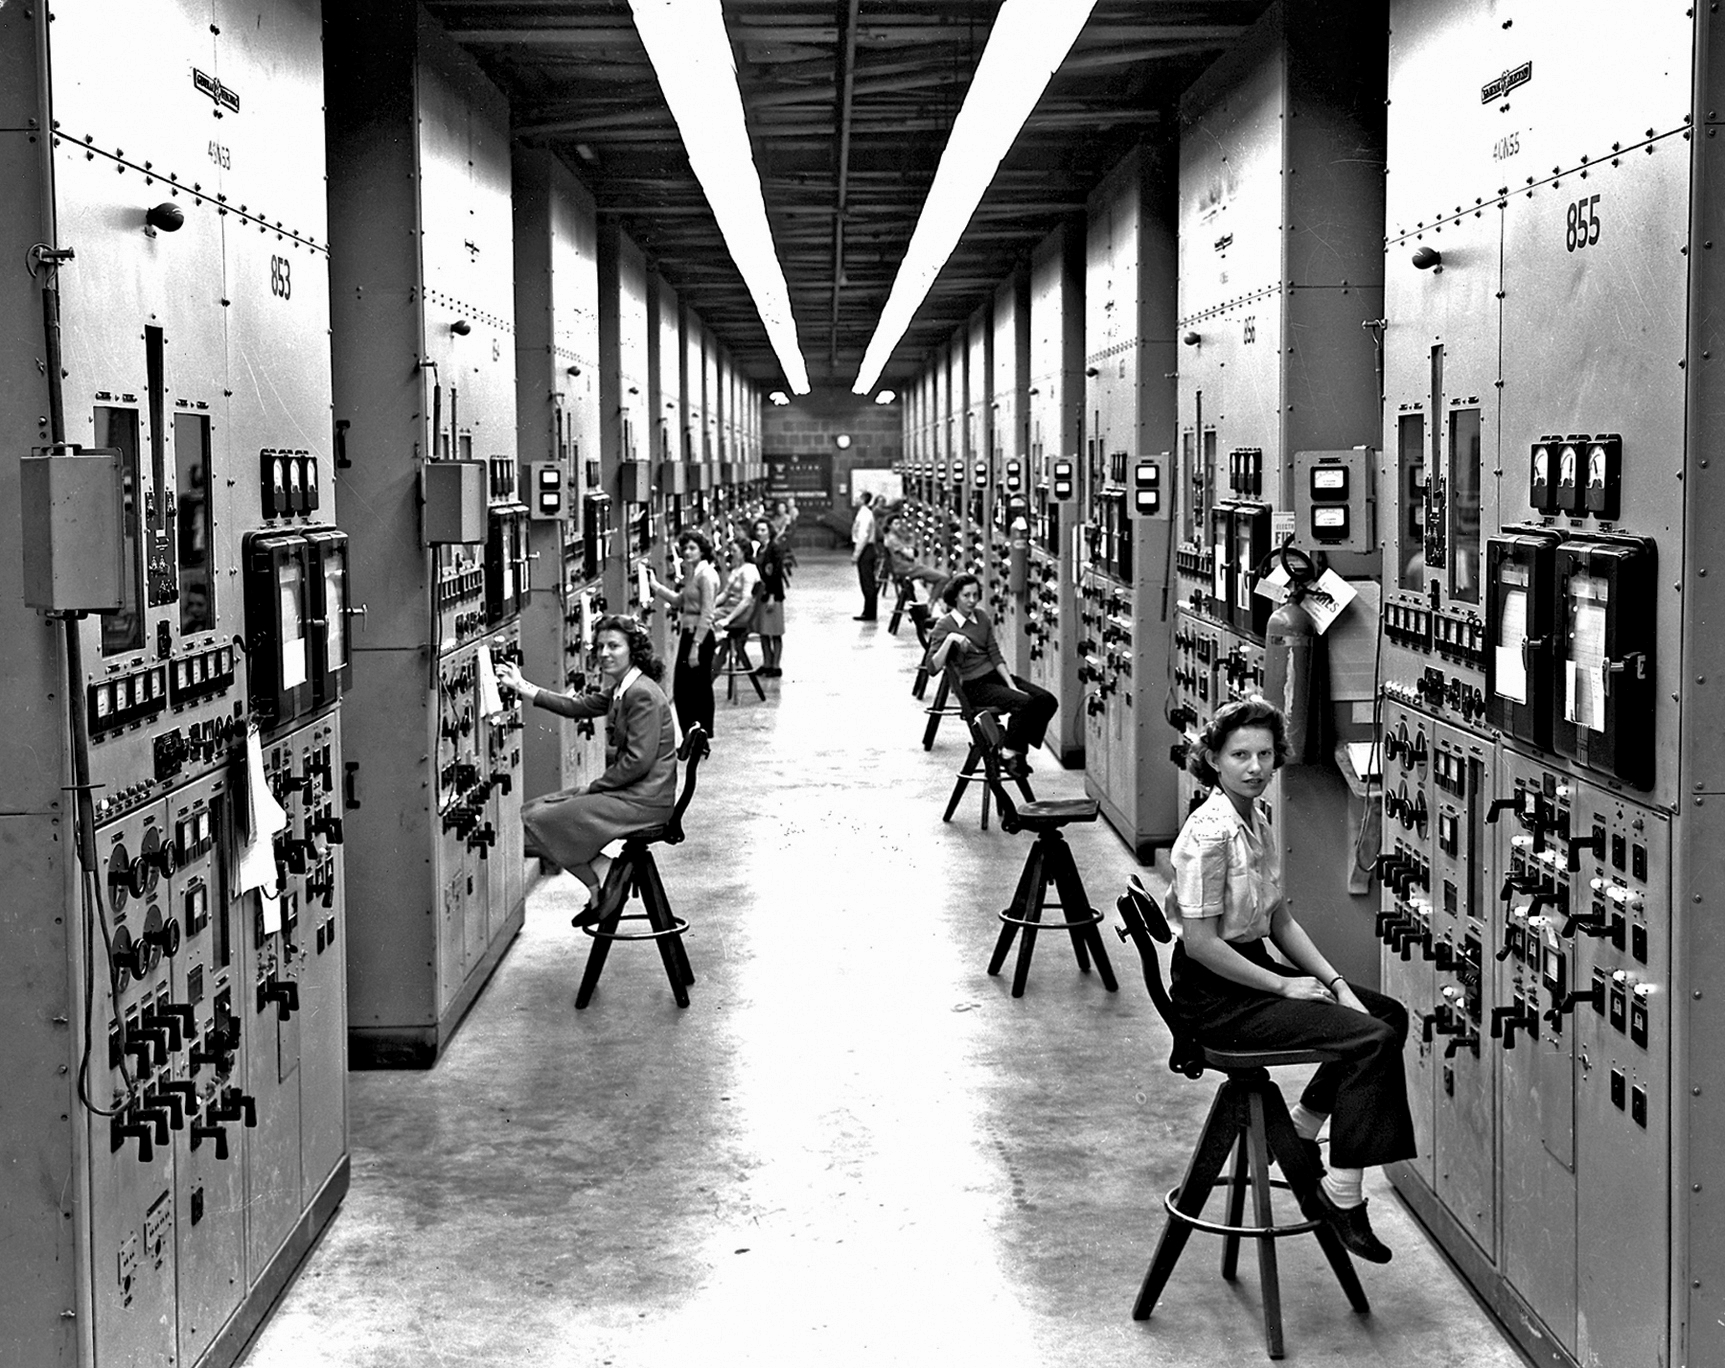 Control panels and operators for calutrons at the Y-12 Plant in Oak Ridge, Tennessee, United States; the woman closest to the camera was identified as Gladys Owens